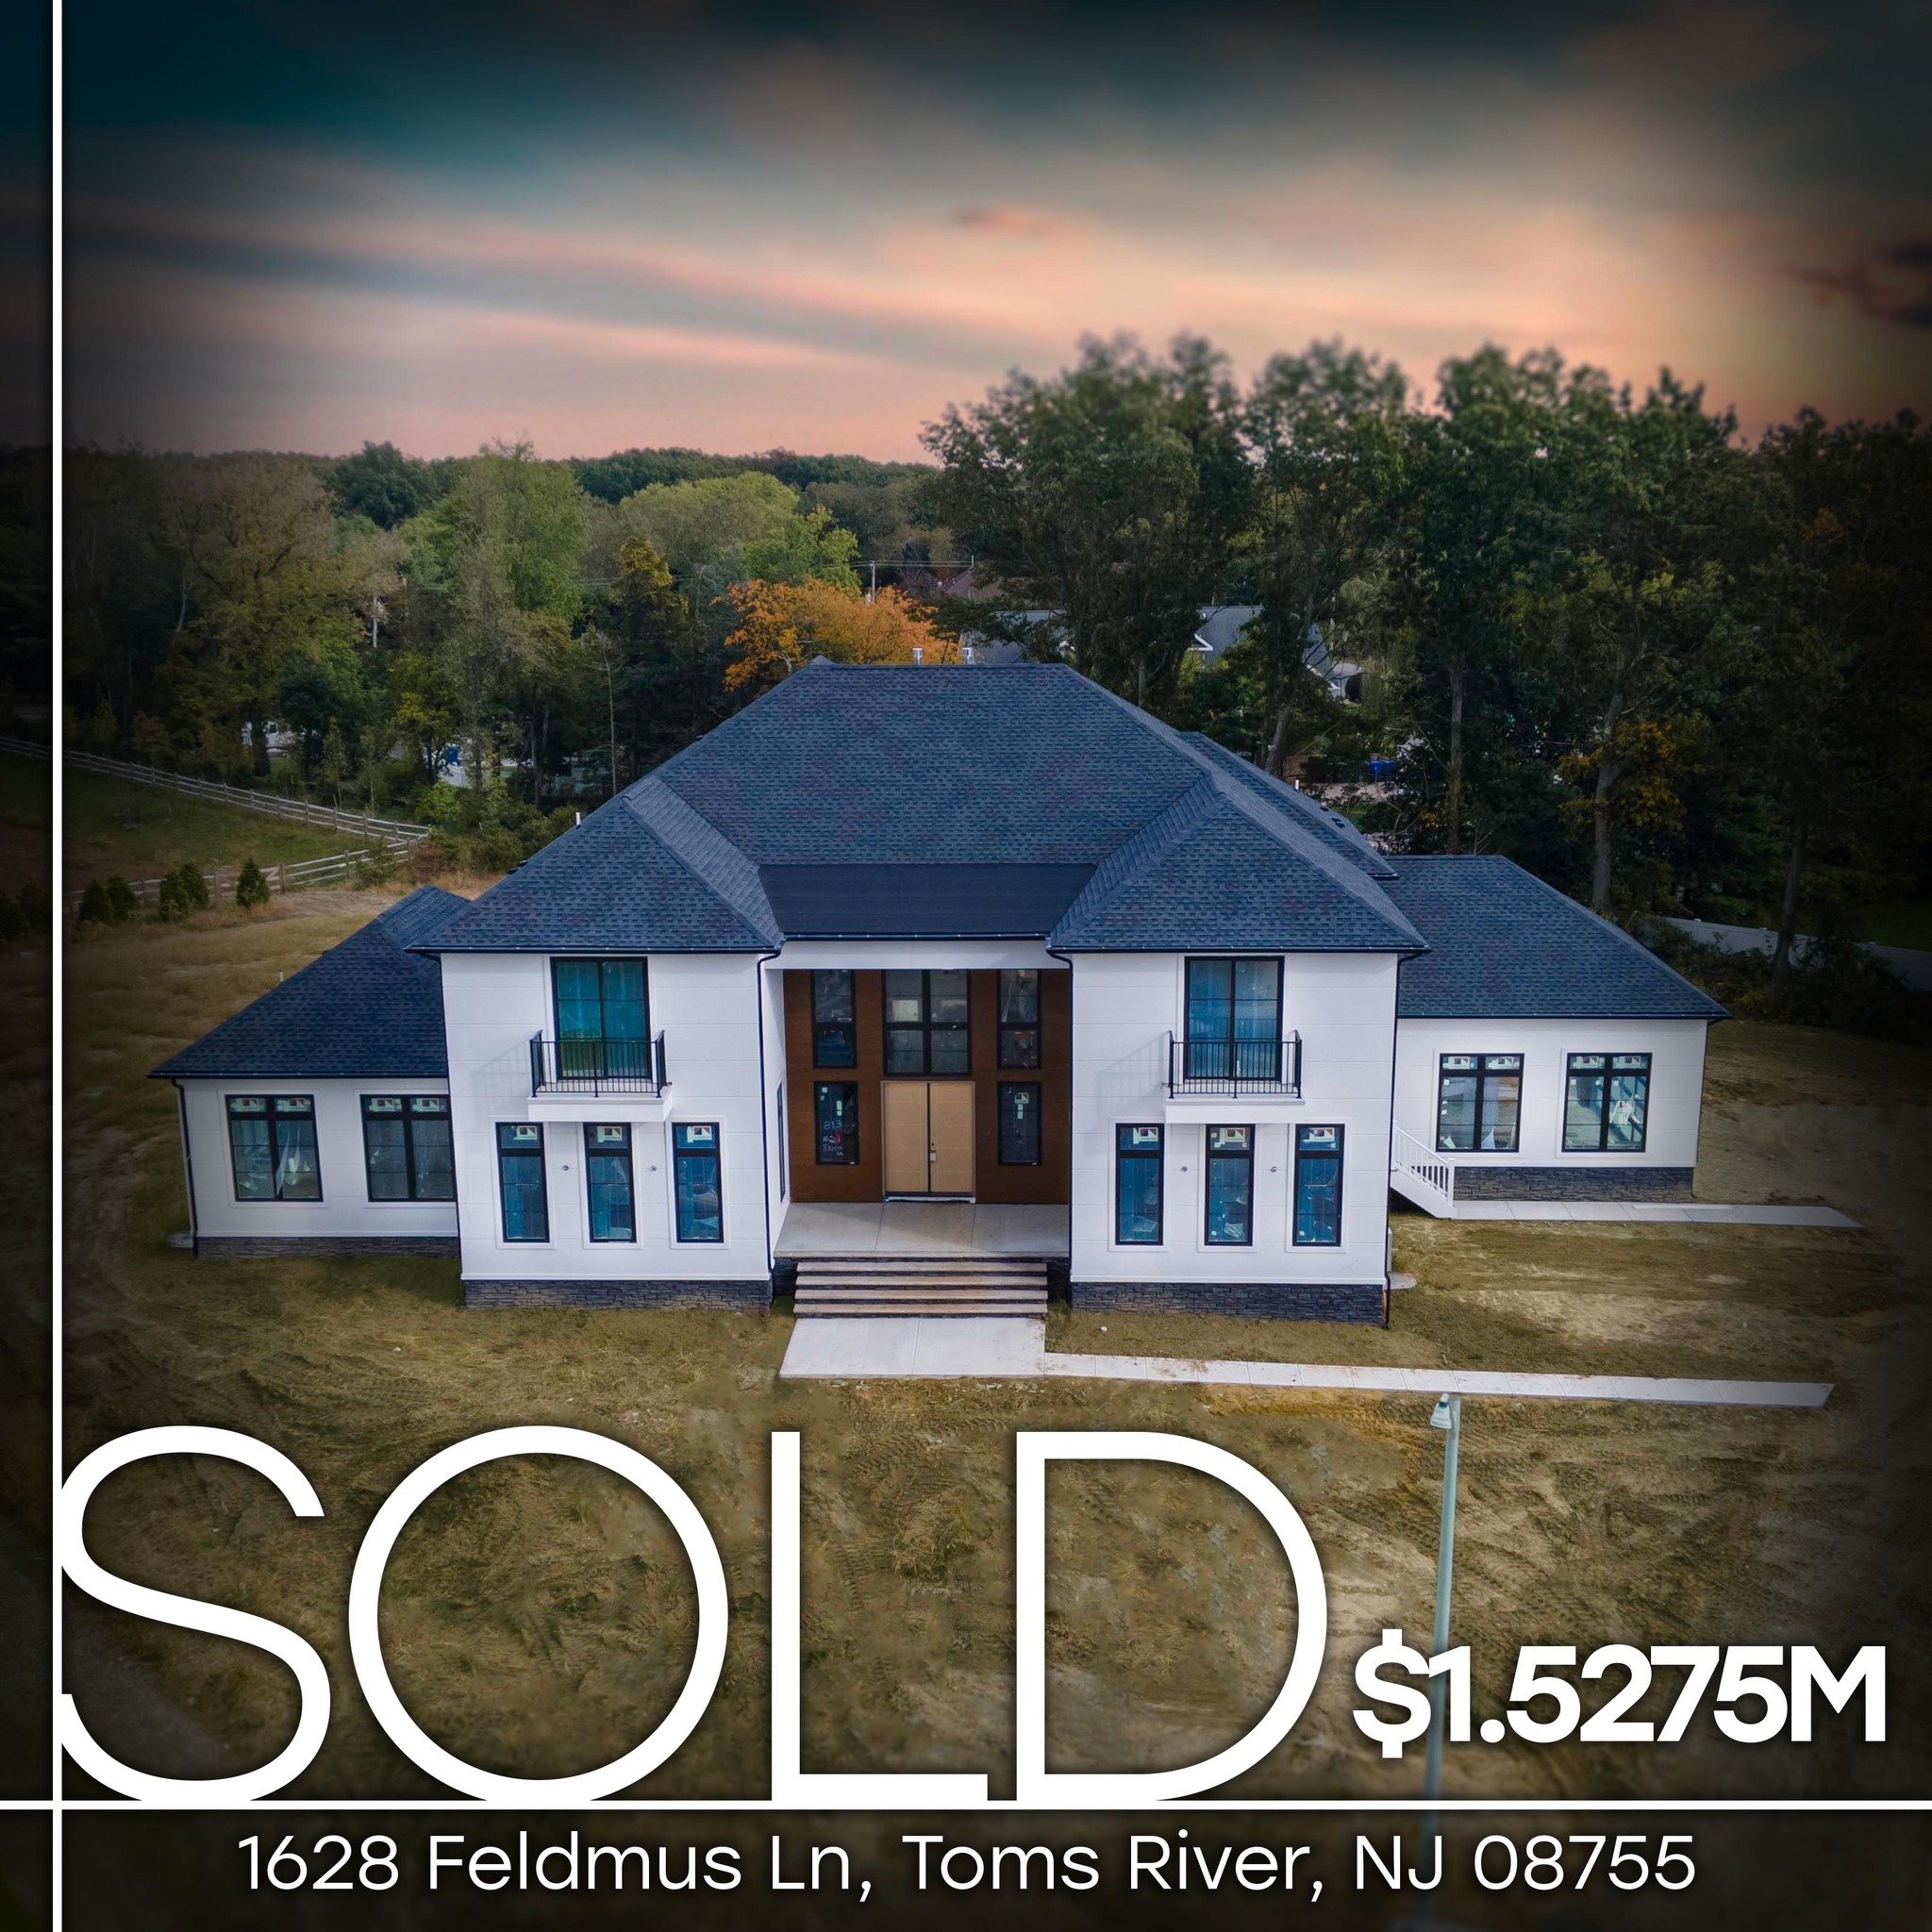 💥JUST SOLD!💥
📍1628 Feldmus Ln, Toms River, NJ 08755
6 Bed | 4.5 Bath | 5,525Ft.&sup2;

This Farm Estates, Premier Gettysburg model is officially Sold! With 10 Ft ceilings, huge gourmet kitchen, and so much more this house is sure to be the perfect